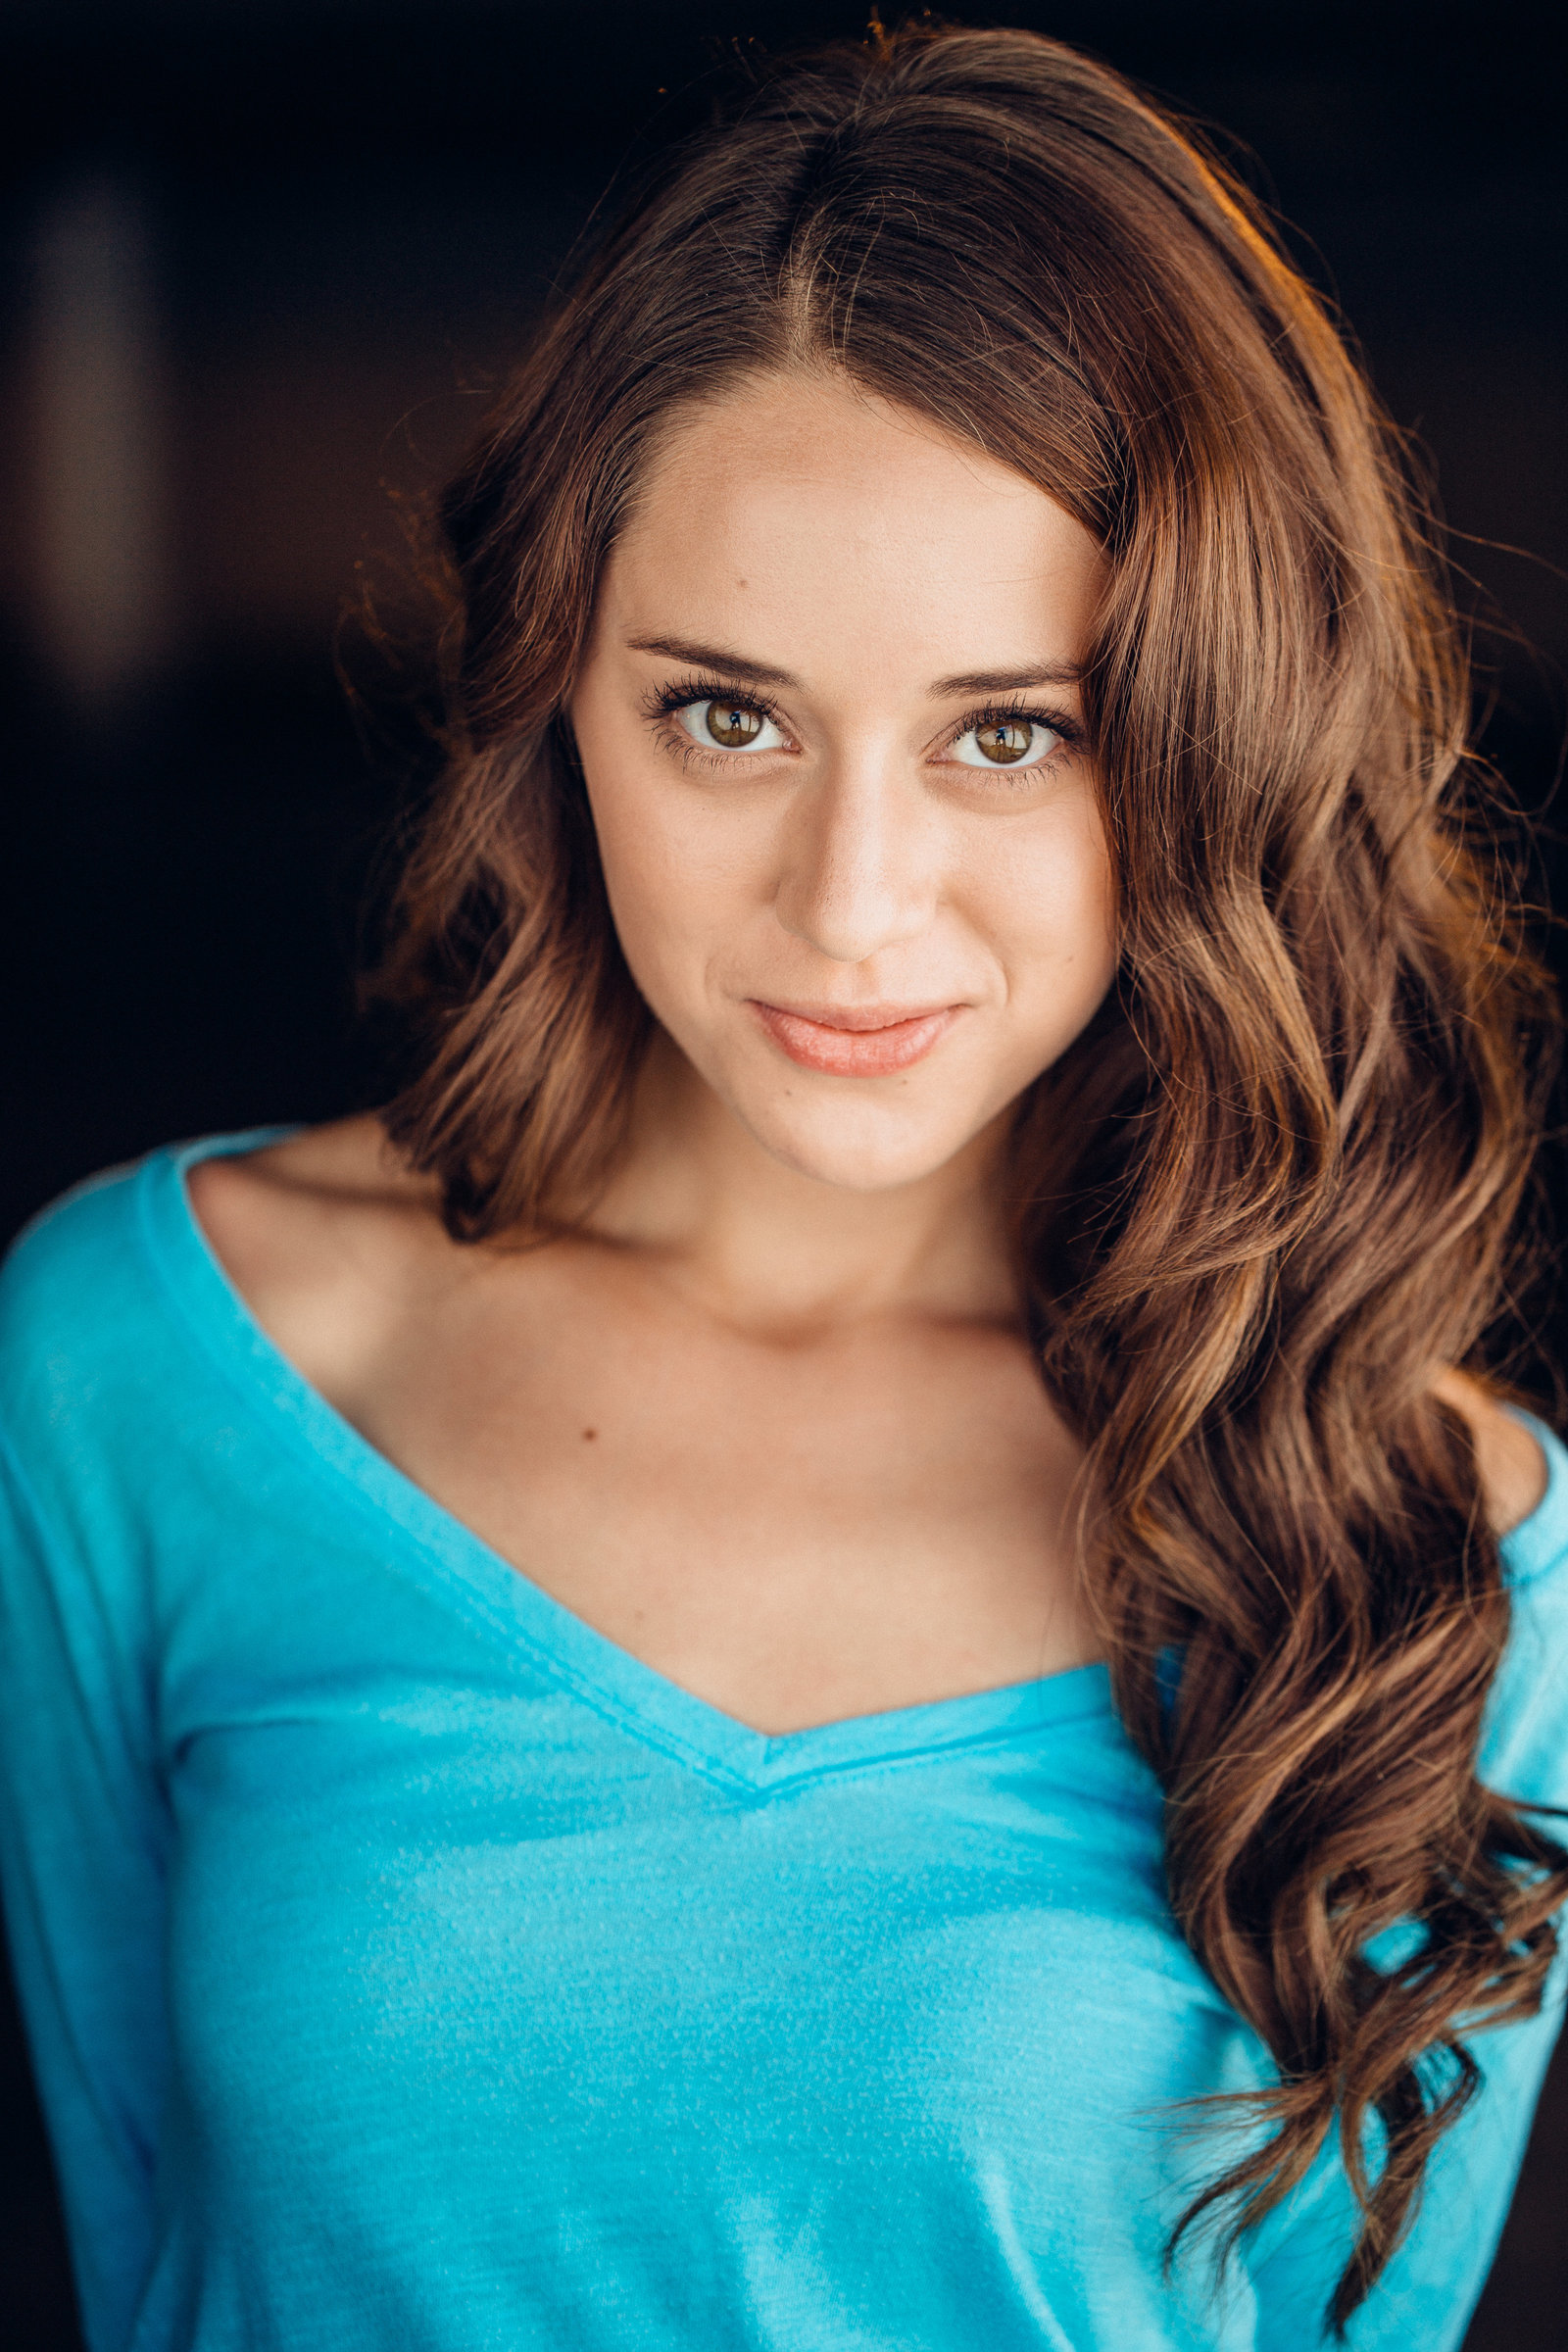 Headshot Photo Of Young In Light Blue Off-Shoulder Blouse